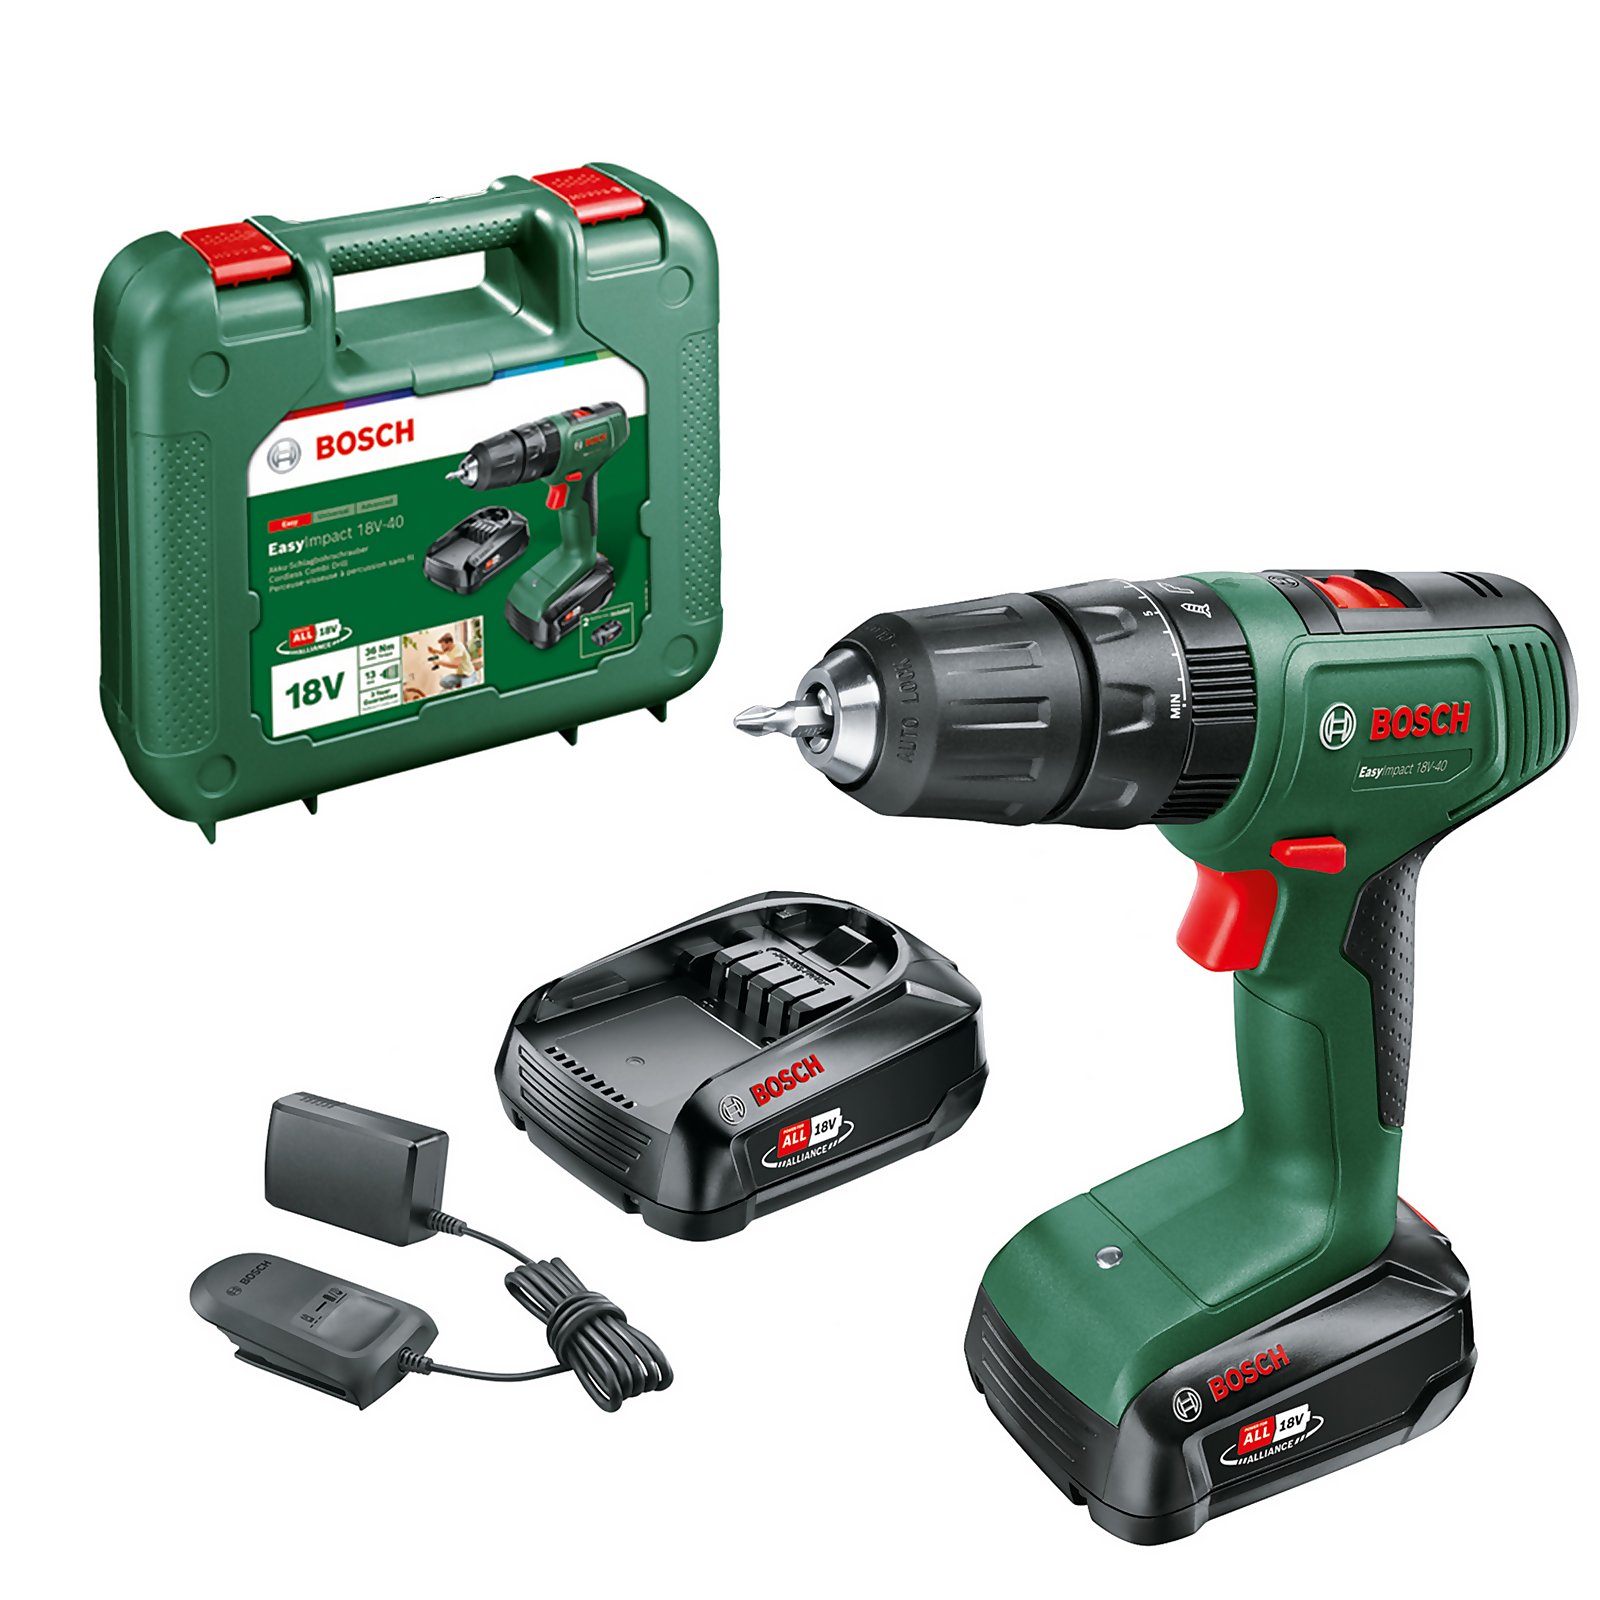 Bosch EasyImpact 18V-40 Combi Drill with 2x 1 5Ah Batteries & Charger